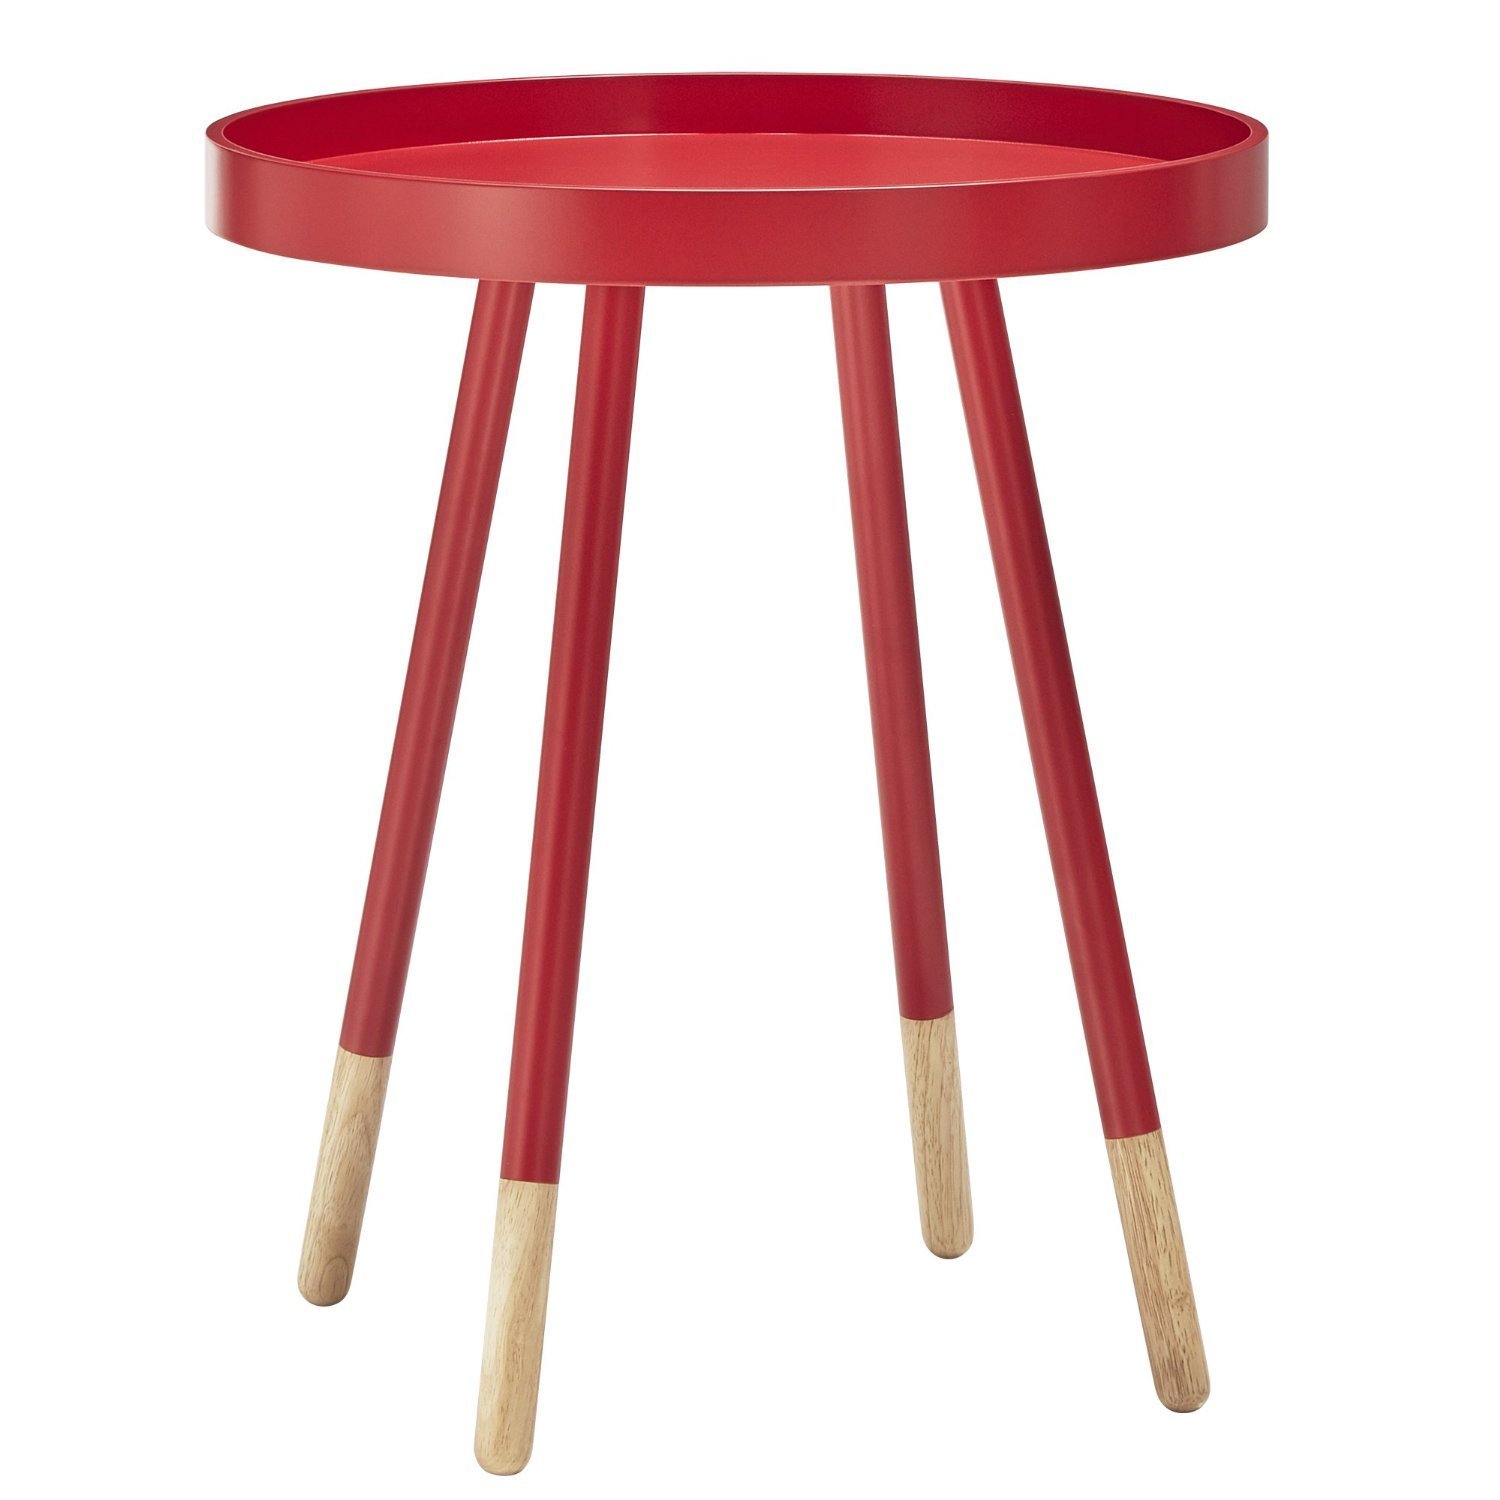 casual contemporary modern paint dipped round spindle bel wood accent table tray top side multiple colors samba red garden outdoor replacement glass for patio with umbrella hole